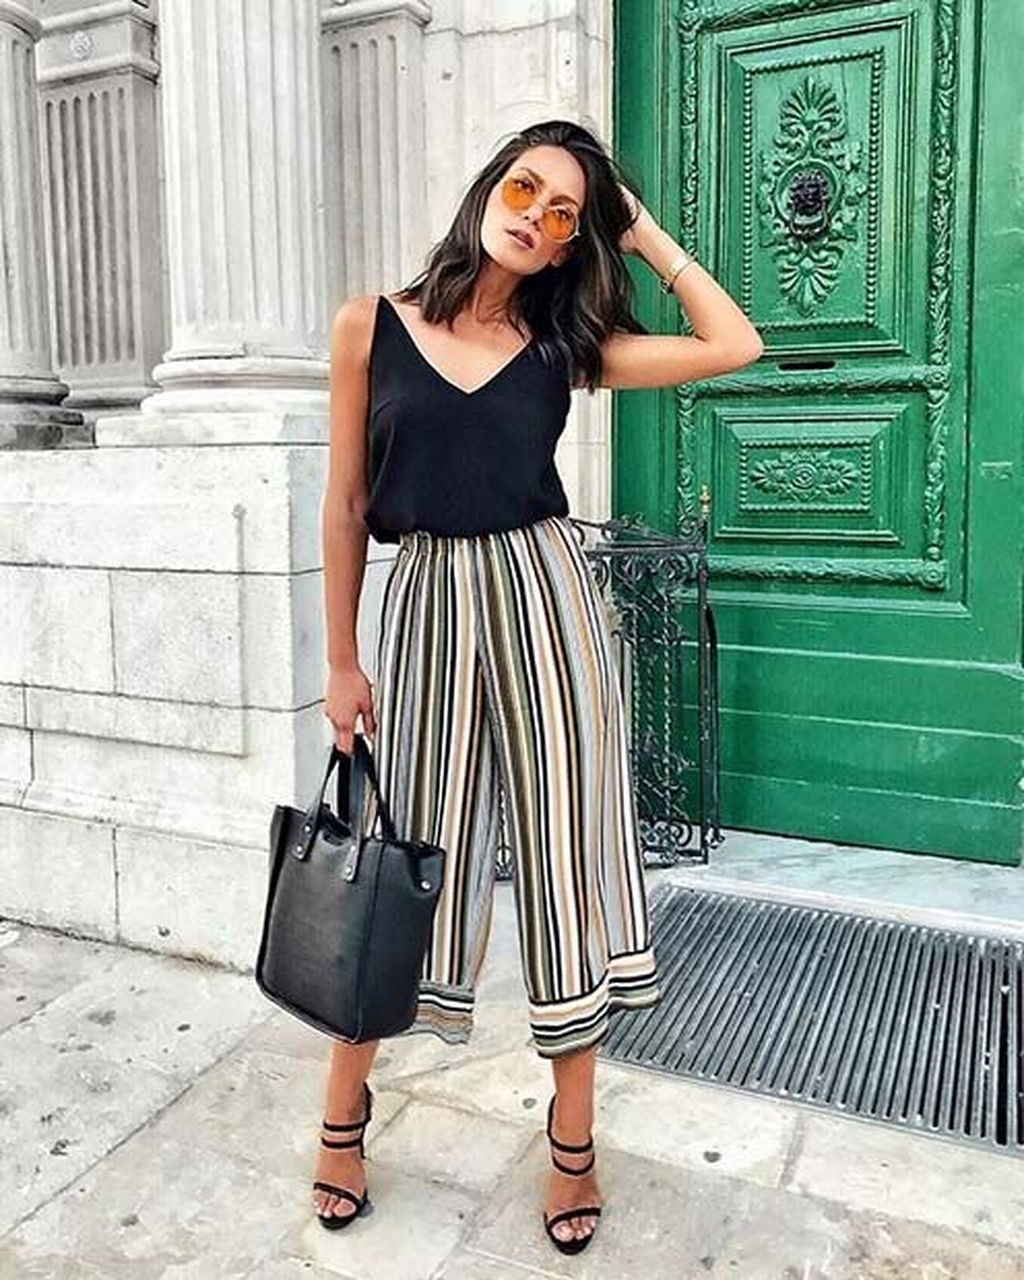 39 Fashionable Work Outfit Ideas To Try Now